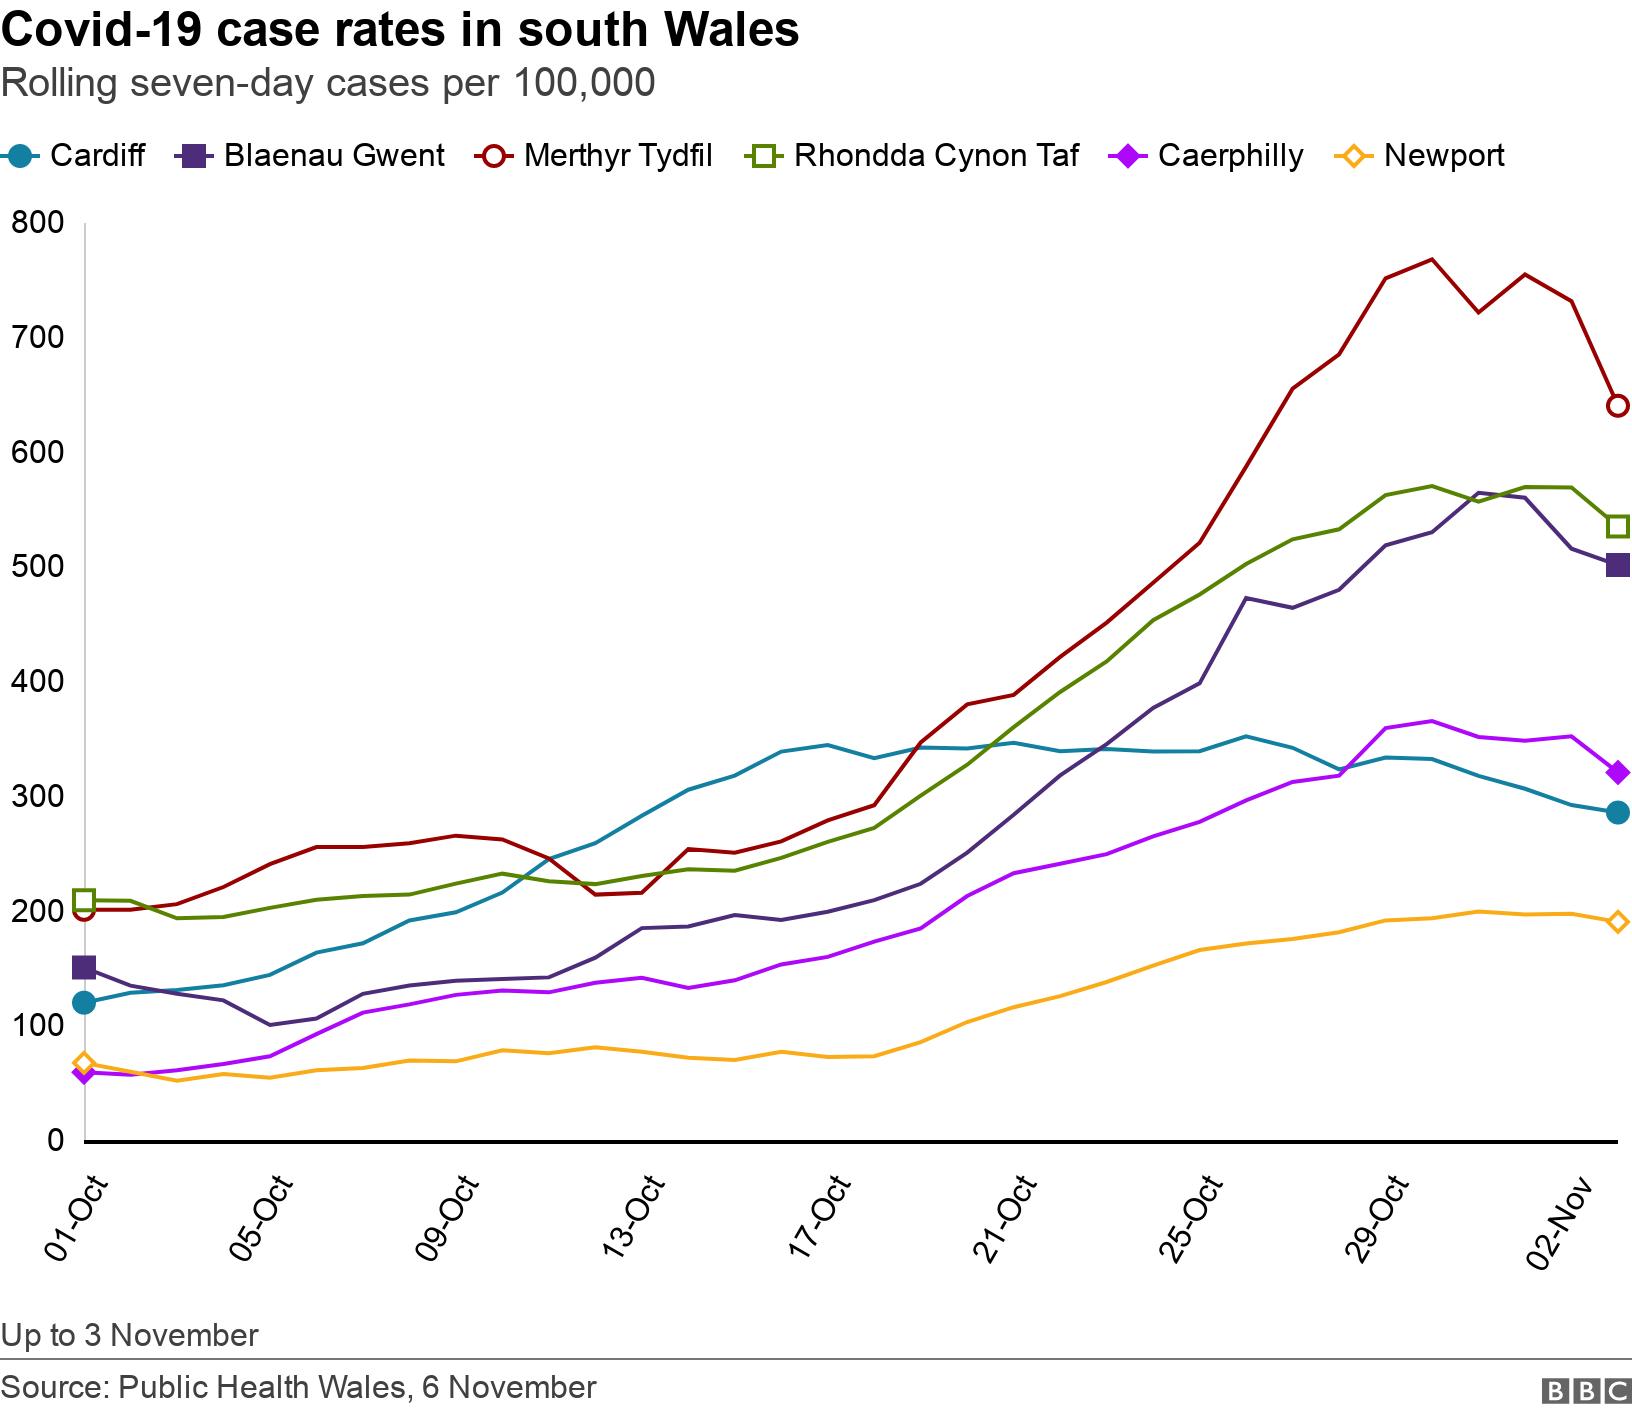 Covid-19 case rates in south Wales. Rolling seven-day cases per 100,000. Up to 3 November.